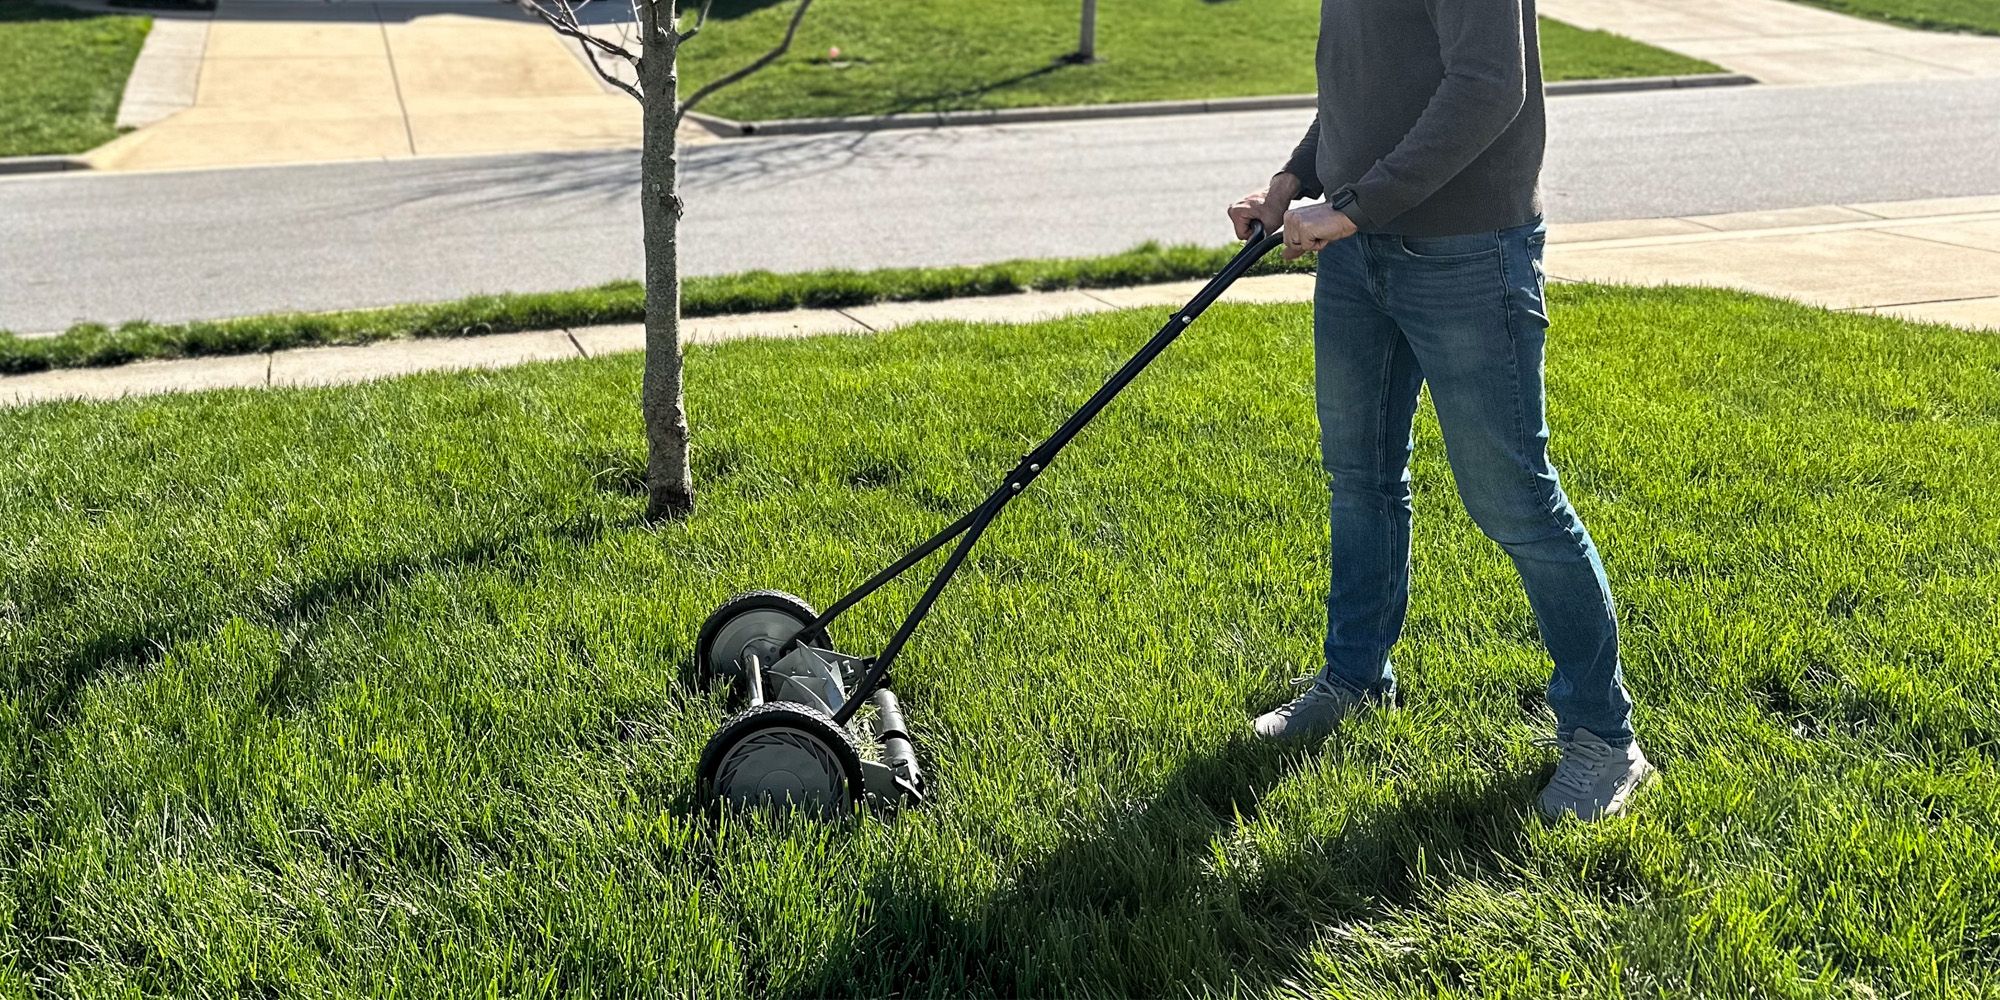 Are Robot Lawn Mowers Worth the Investment? Agricultural Engineers Weigh In